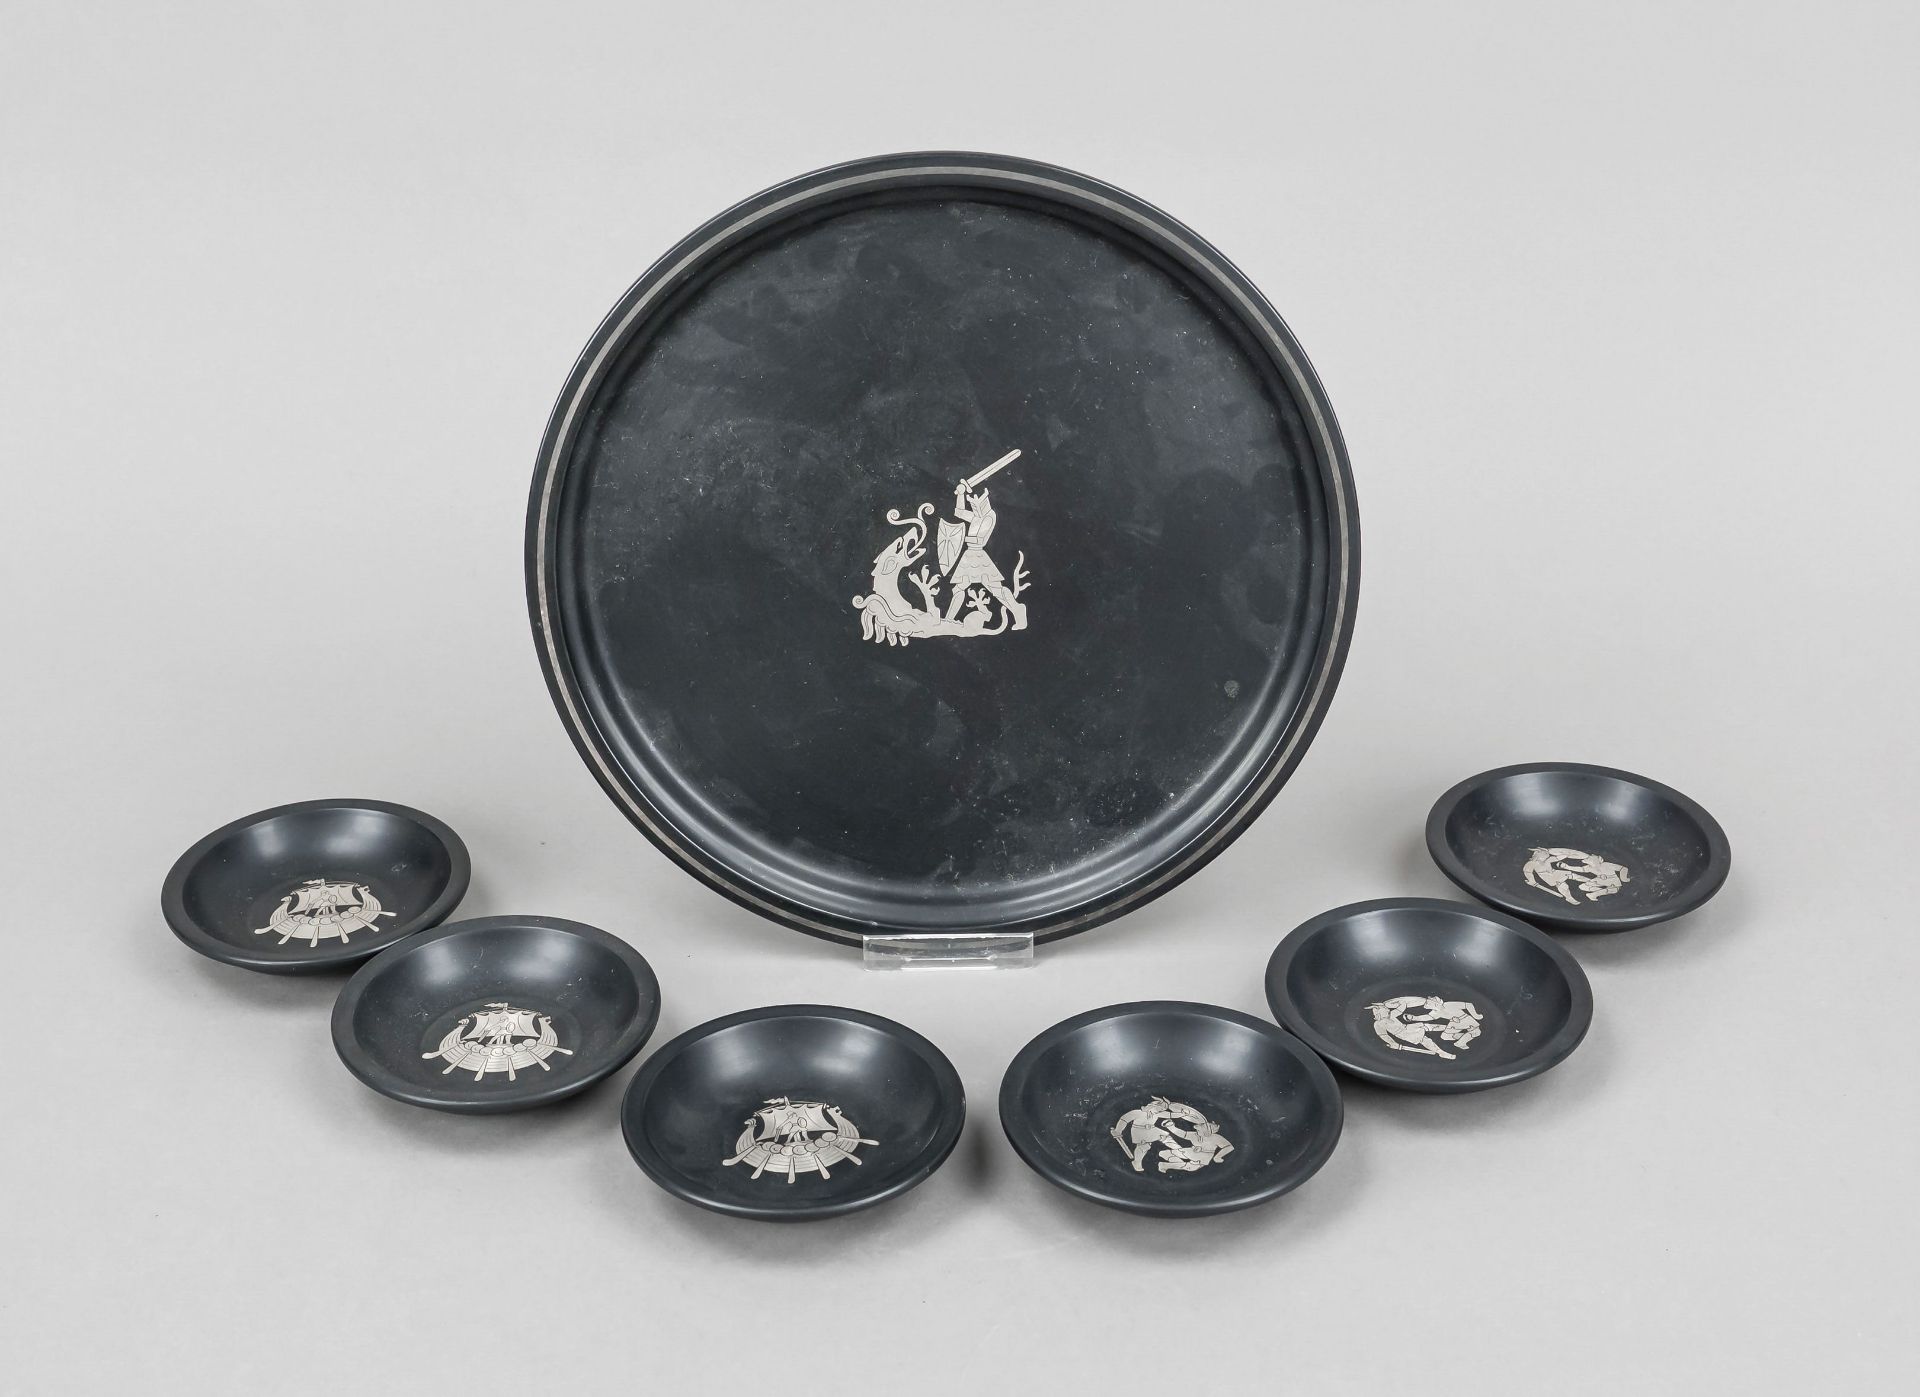 Seven-piece set with silver inlays, Sweden, c. 1960, Perstorp master mark, silver 830/000, black